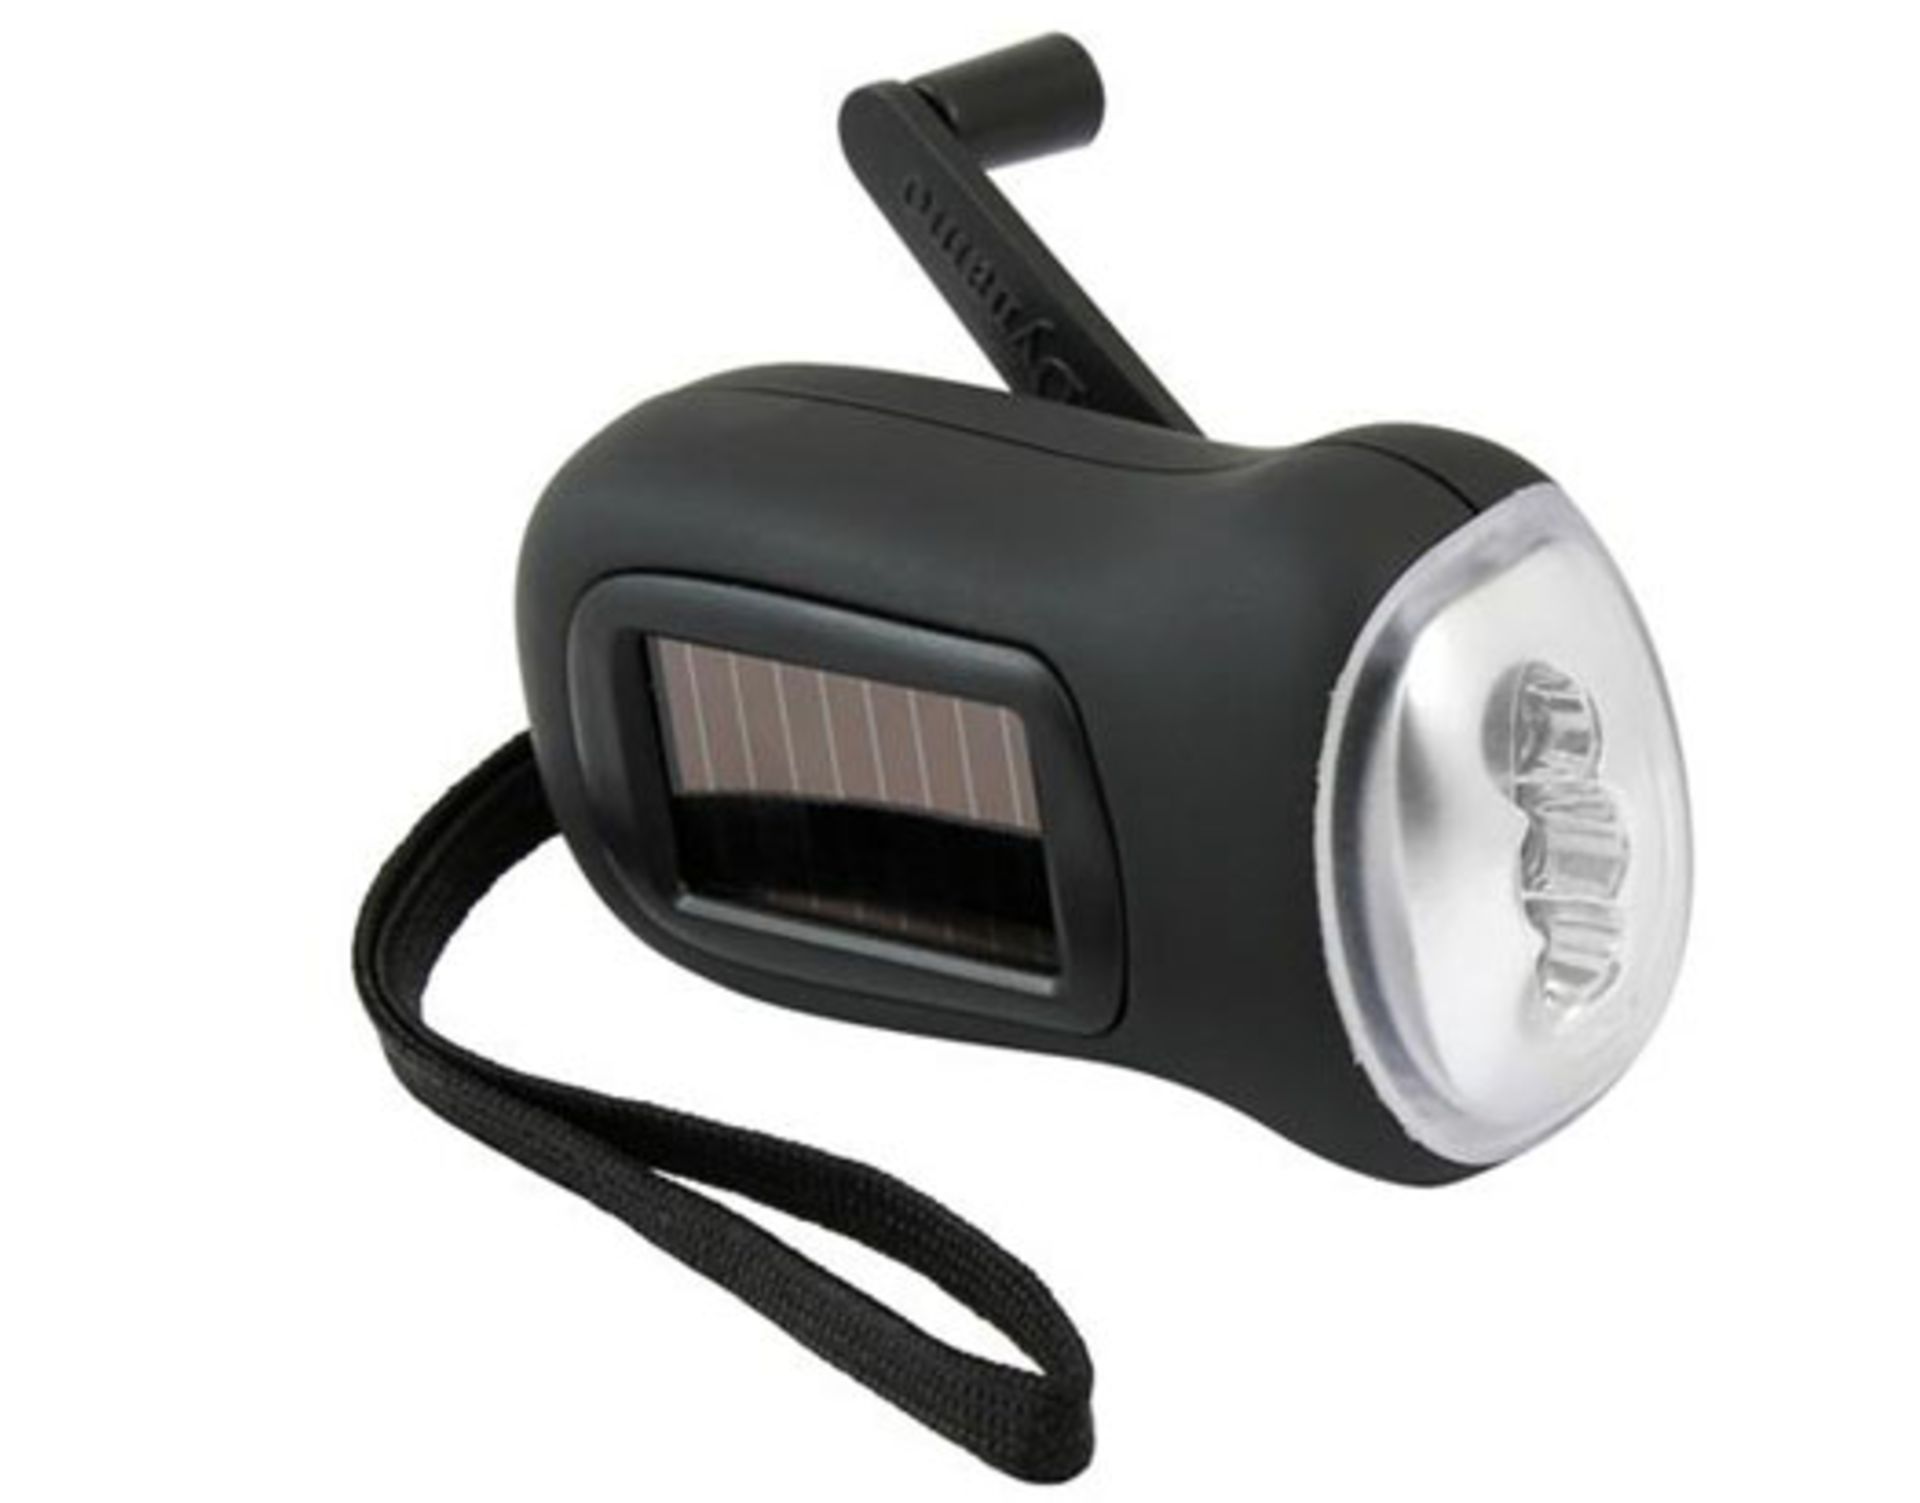 V *TRADE QTY* Brand New 3 LED Wind Up Solar Torch X 36 YOUR BID PRICE TO BE MULTIPLIED BY THIRTY-